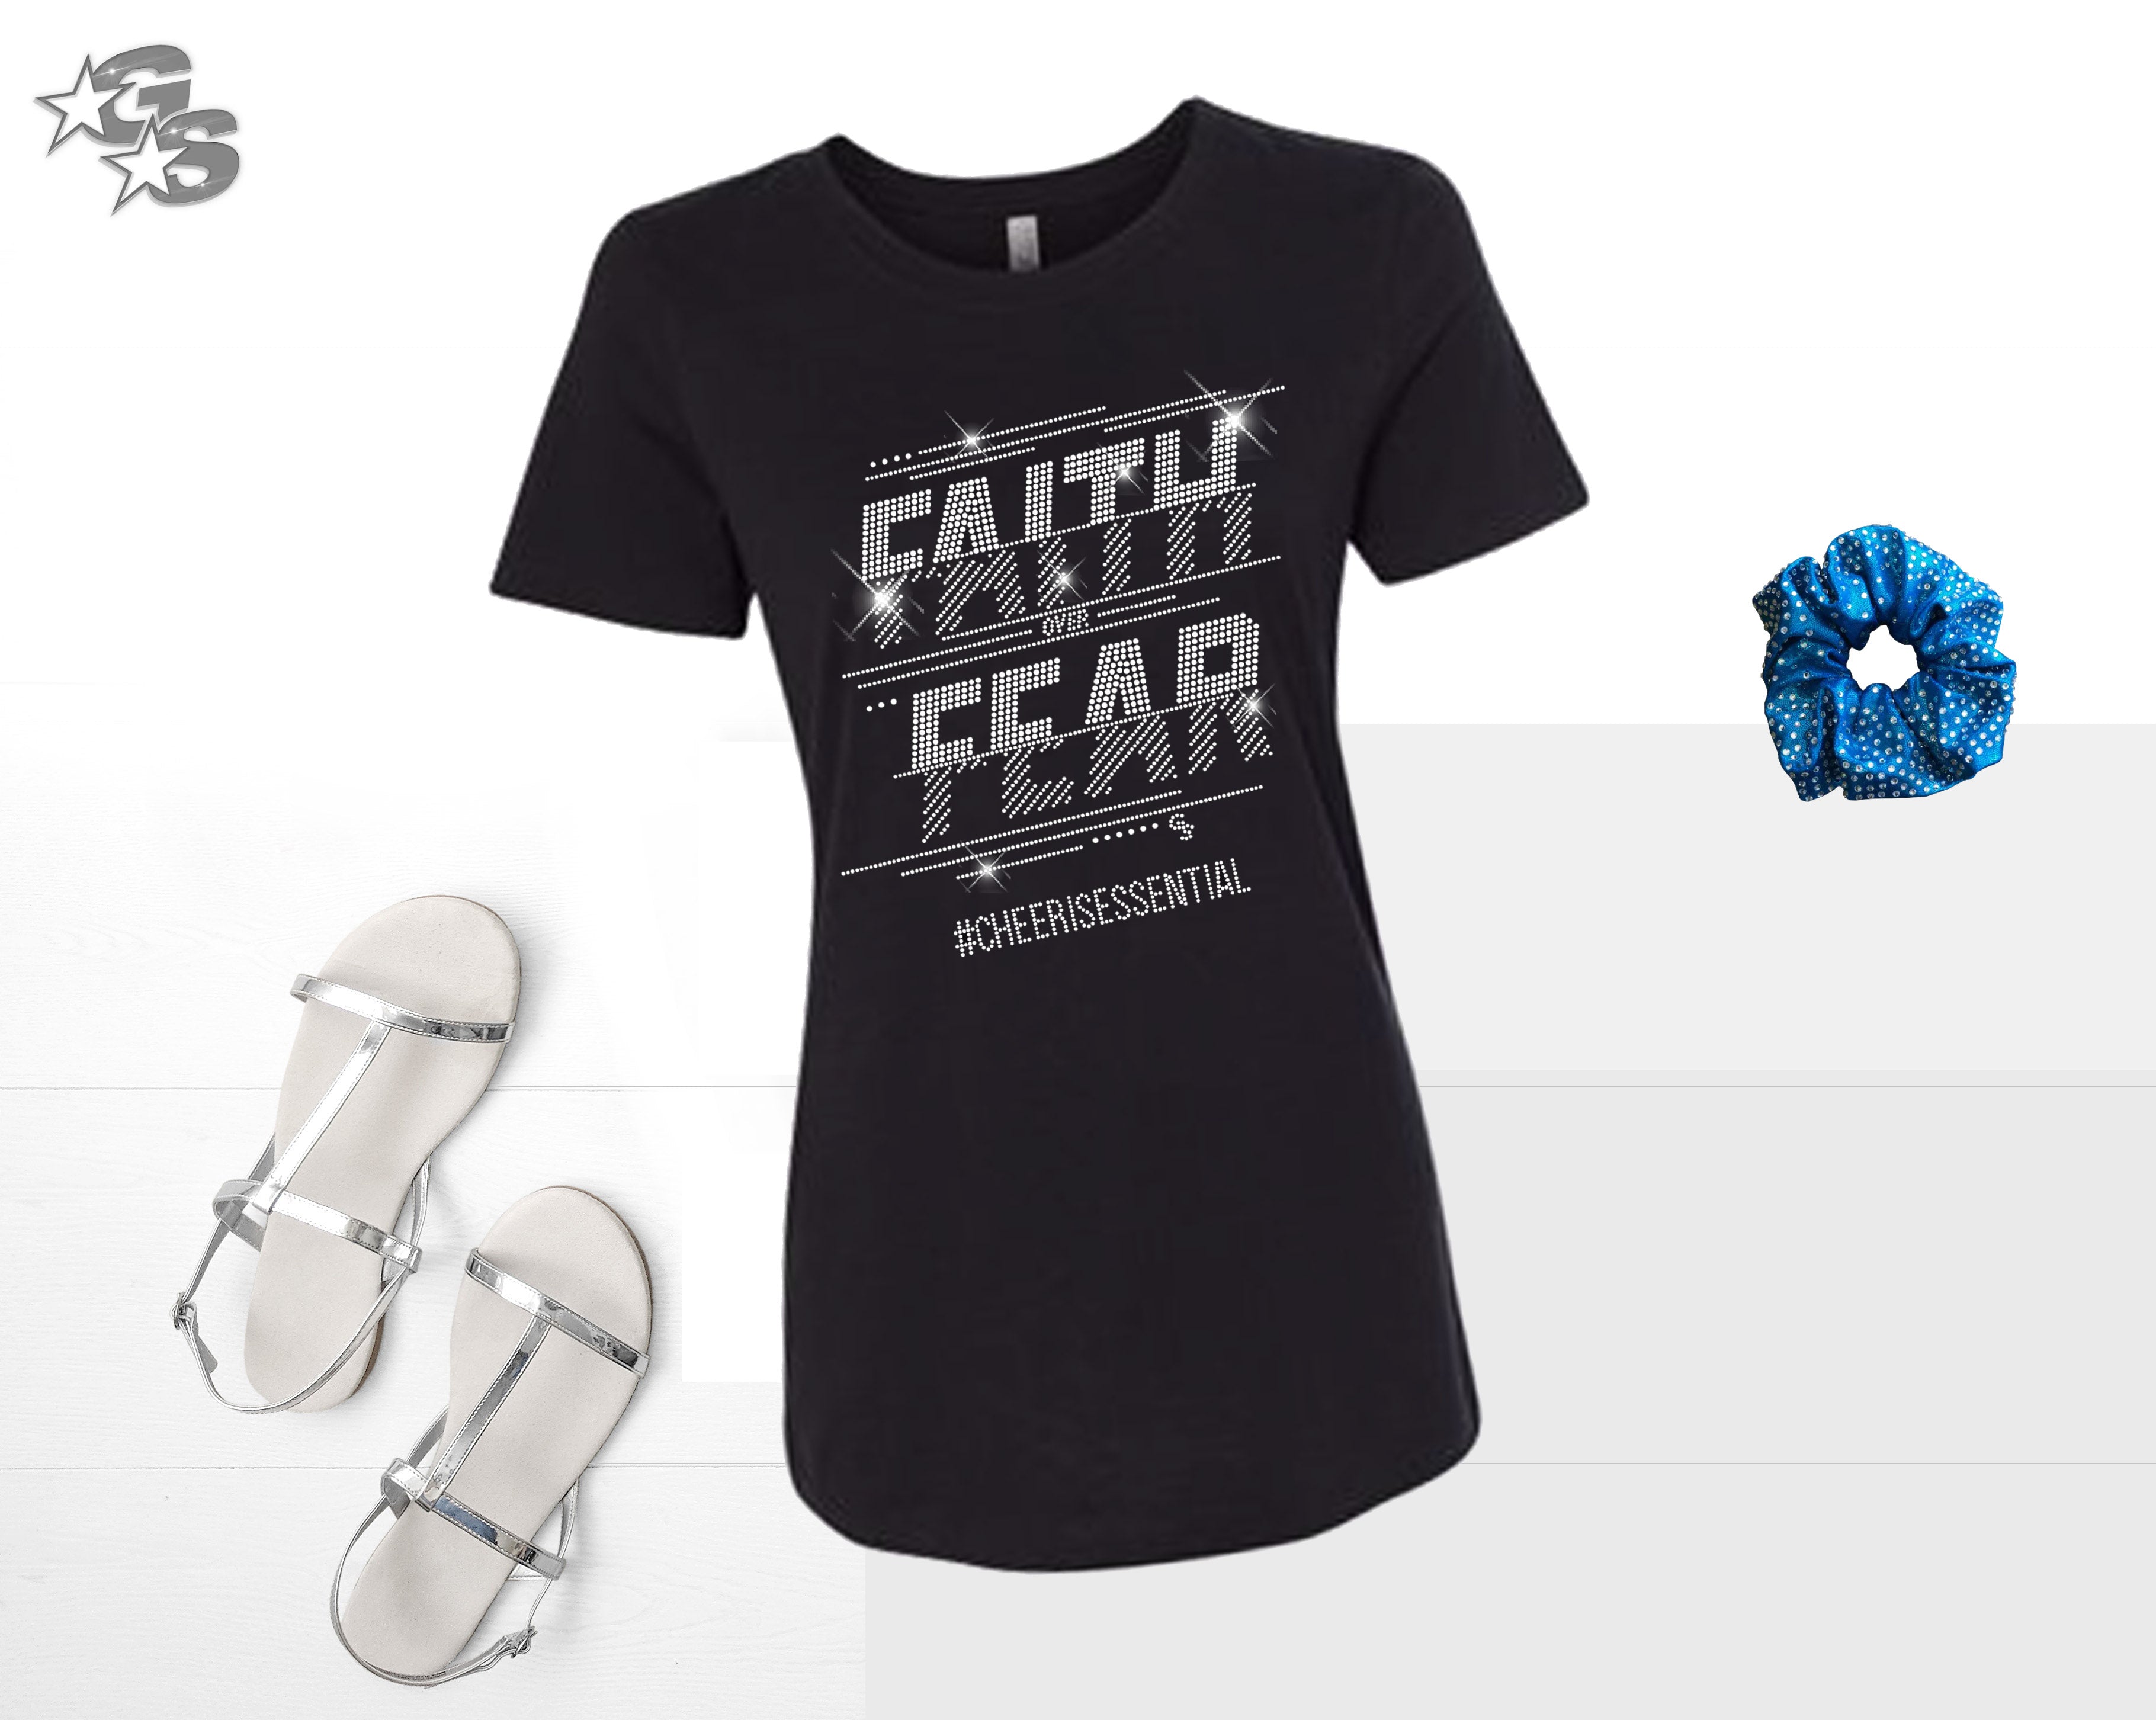 Faith Over Fear FITTED T-SHIRT  (Black) - for Cheer Dance or Gymnastics - Bling logo